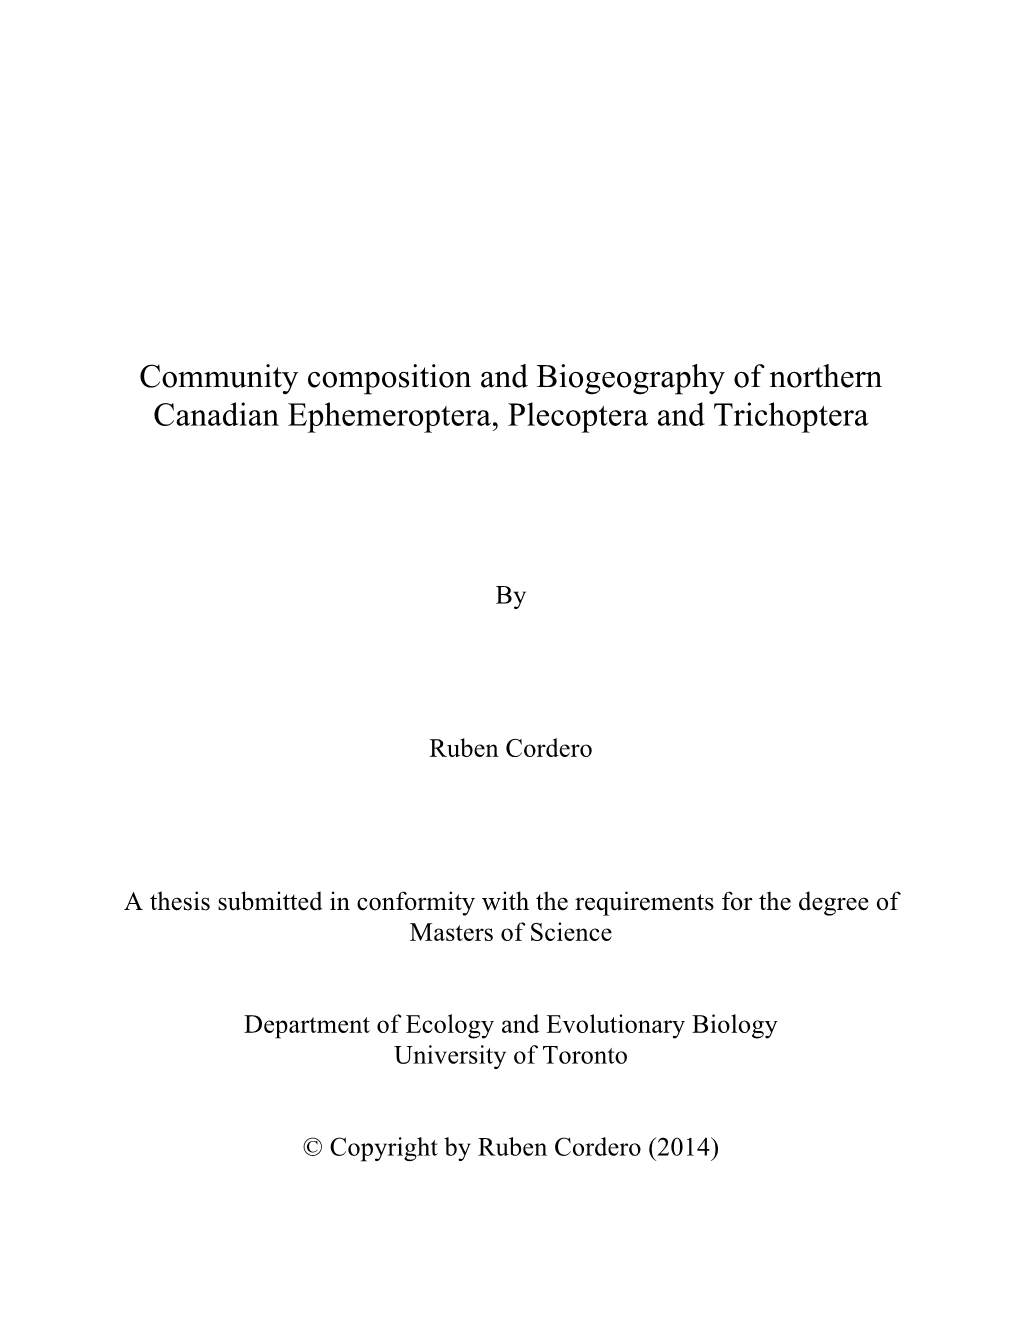 Community Composition and Biogeography of Northern Canadian Ephemeroptera, Plecoptera and Trichoptera